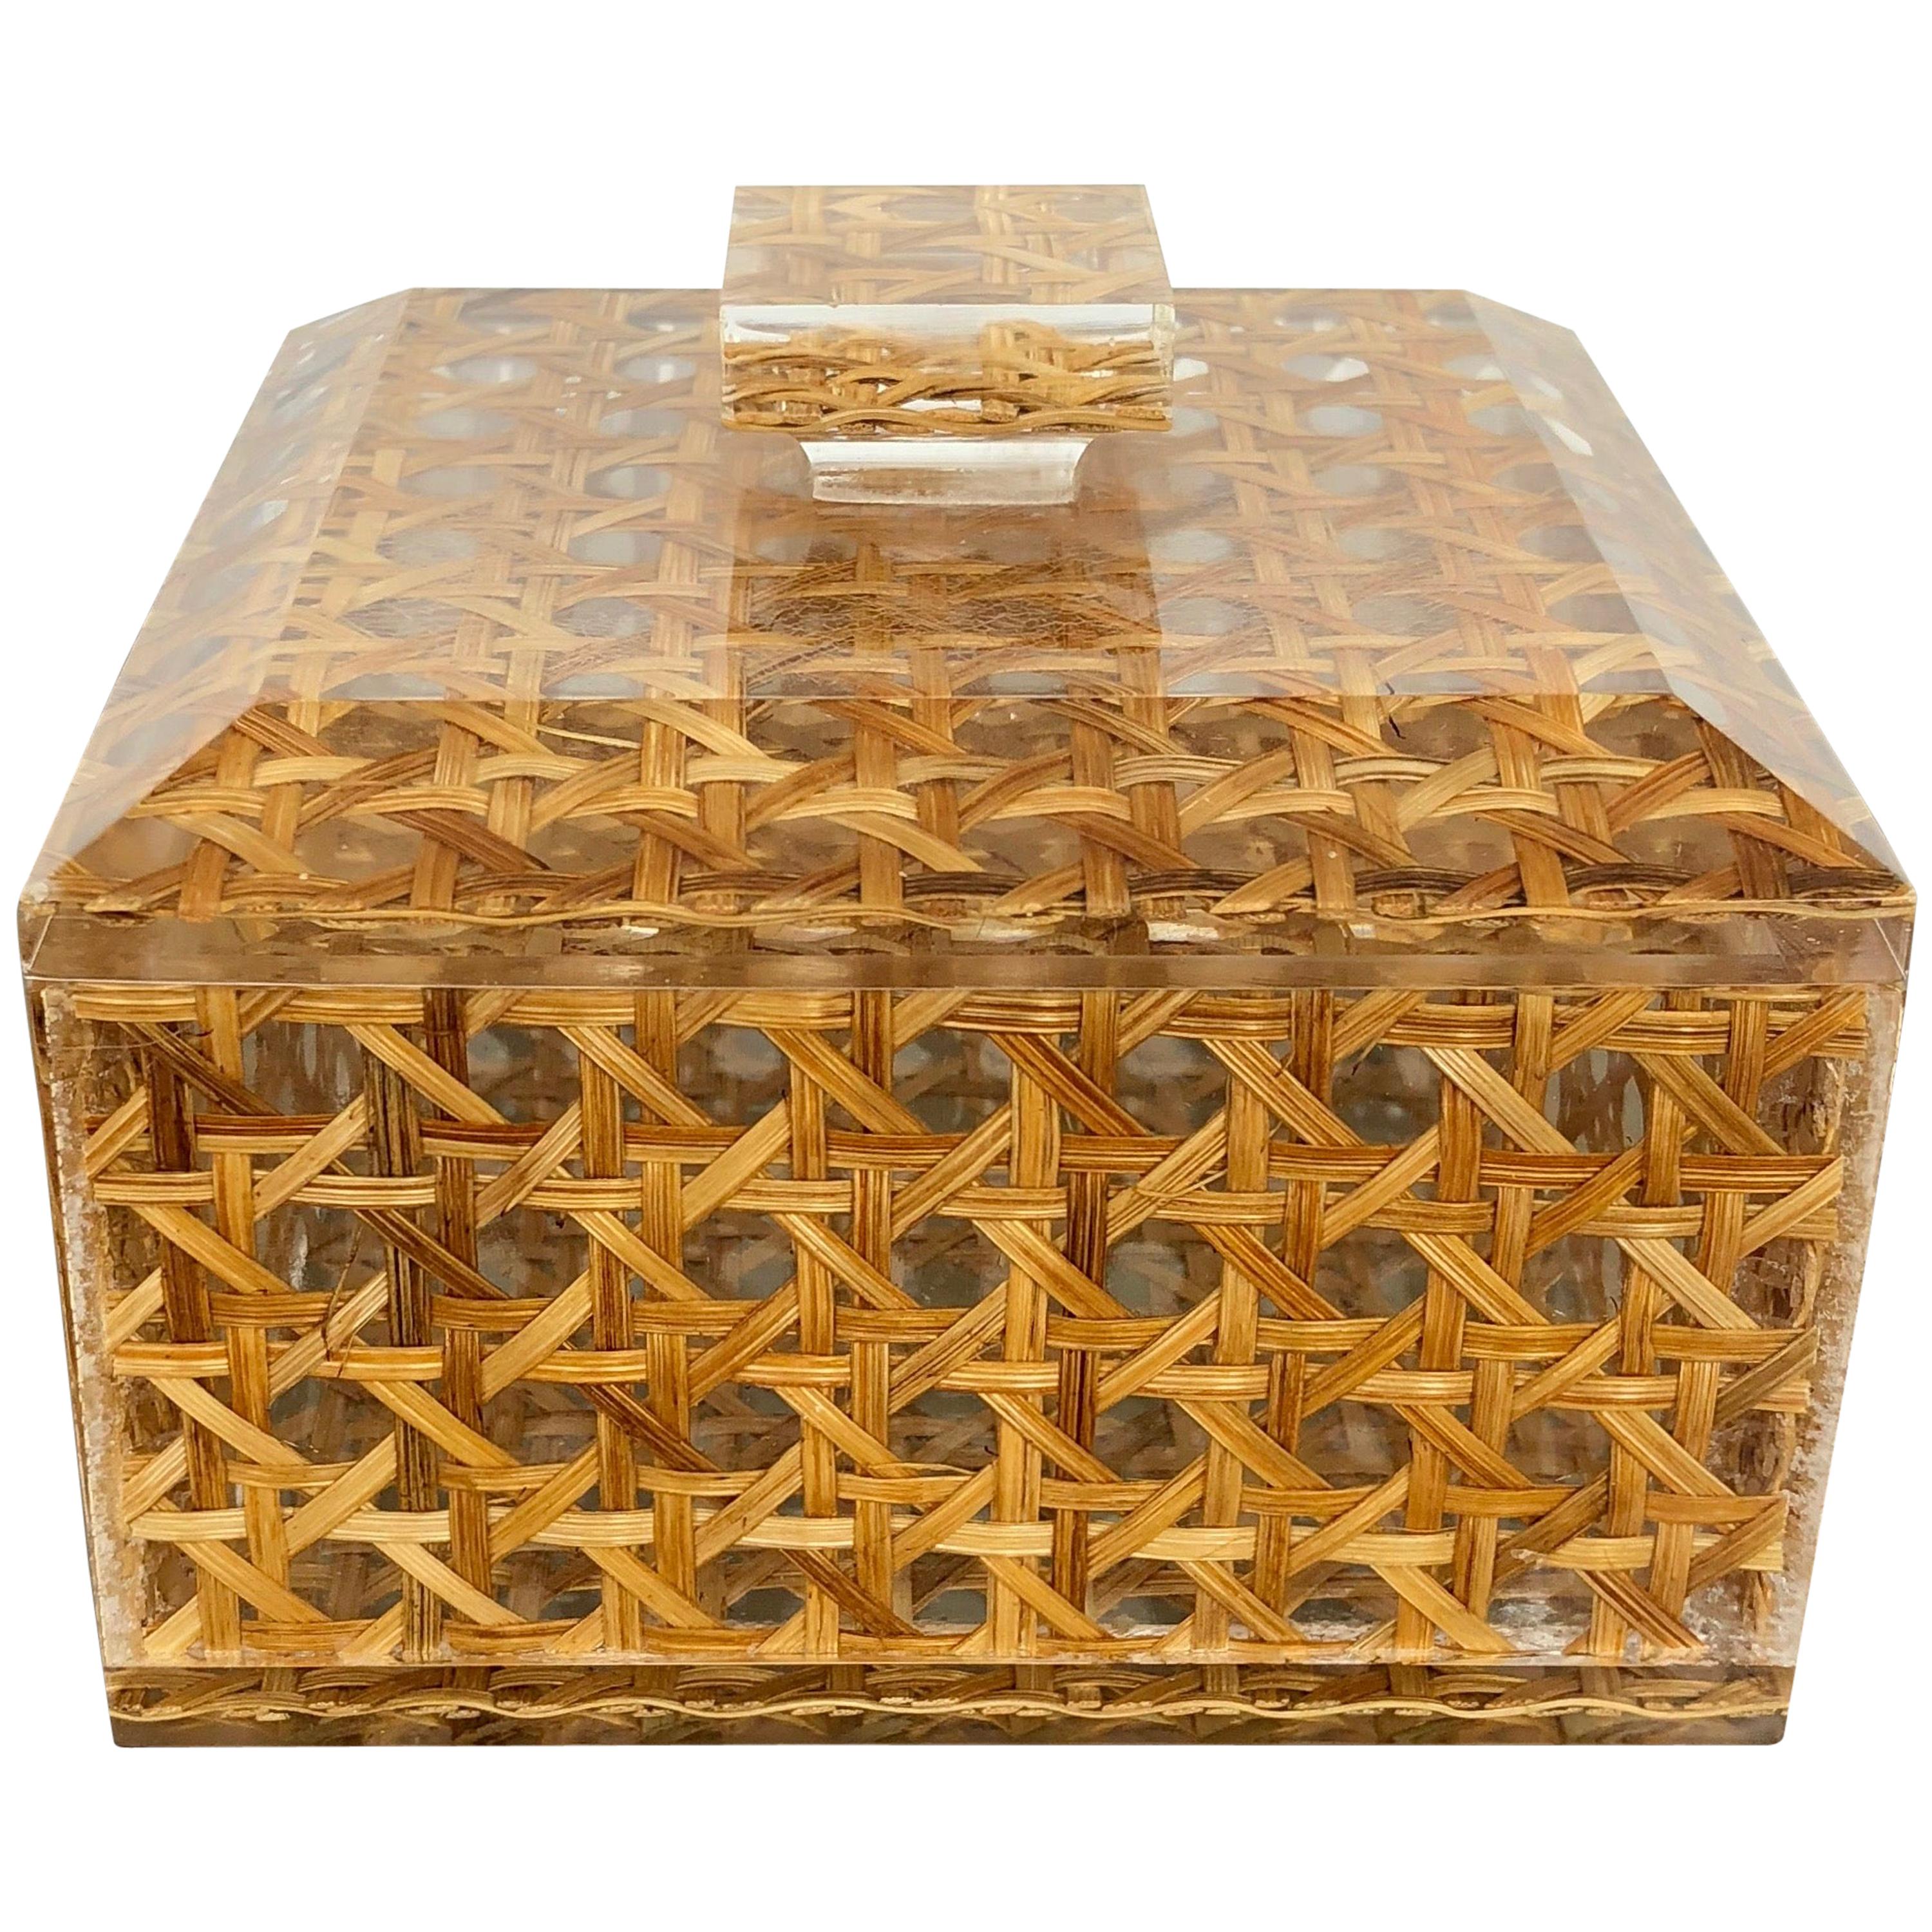 Squared Box in Lucite and Rattan, Christian Dior Style, 1970s, France